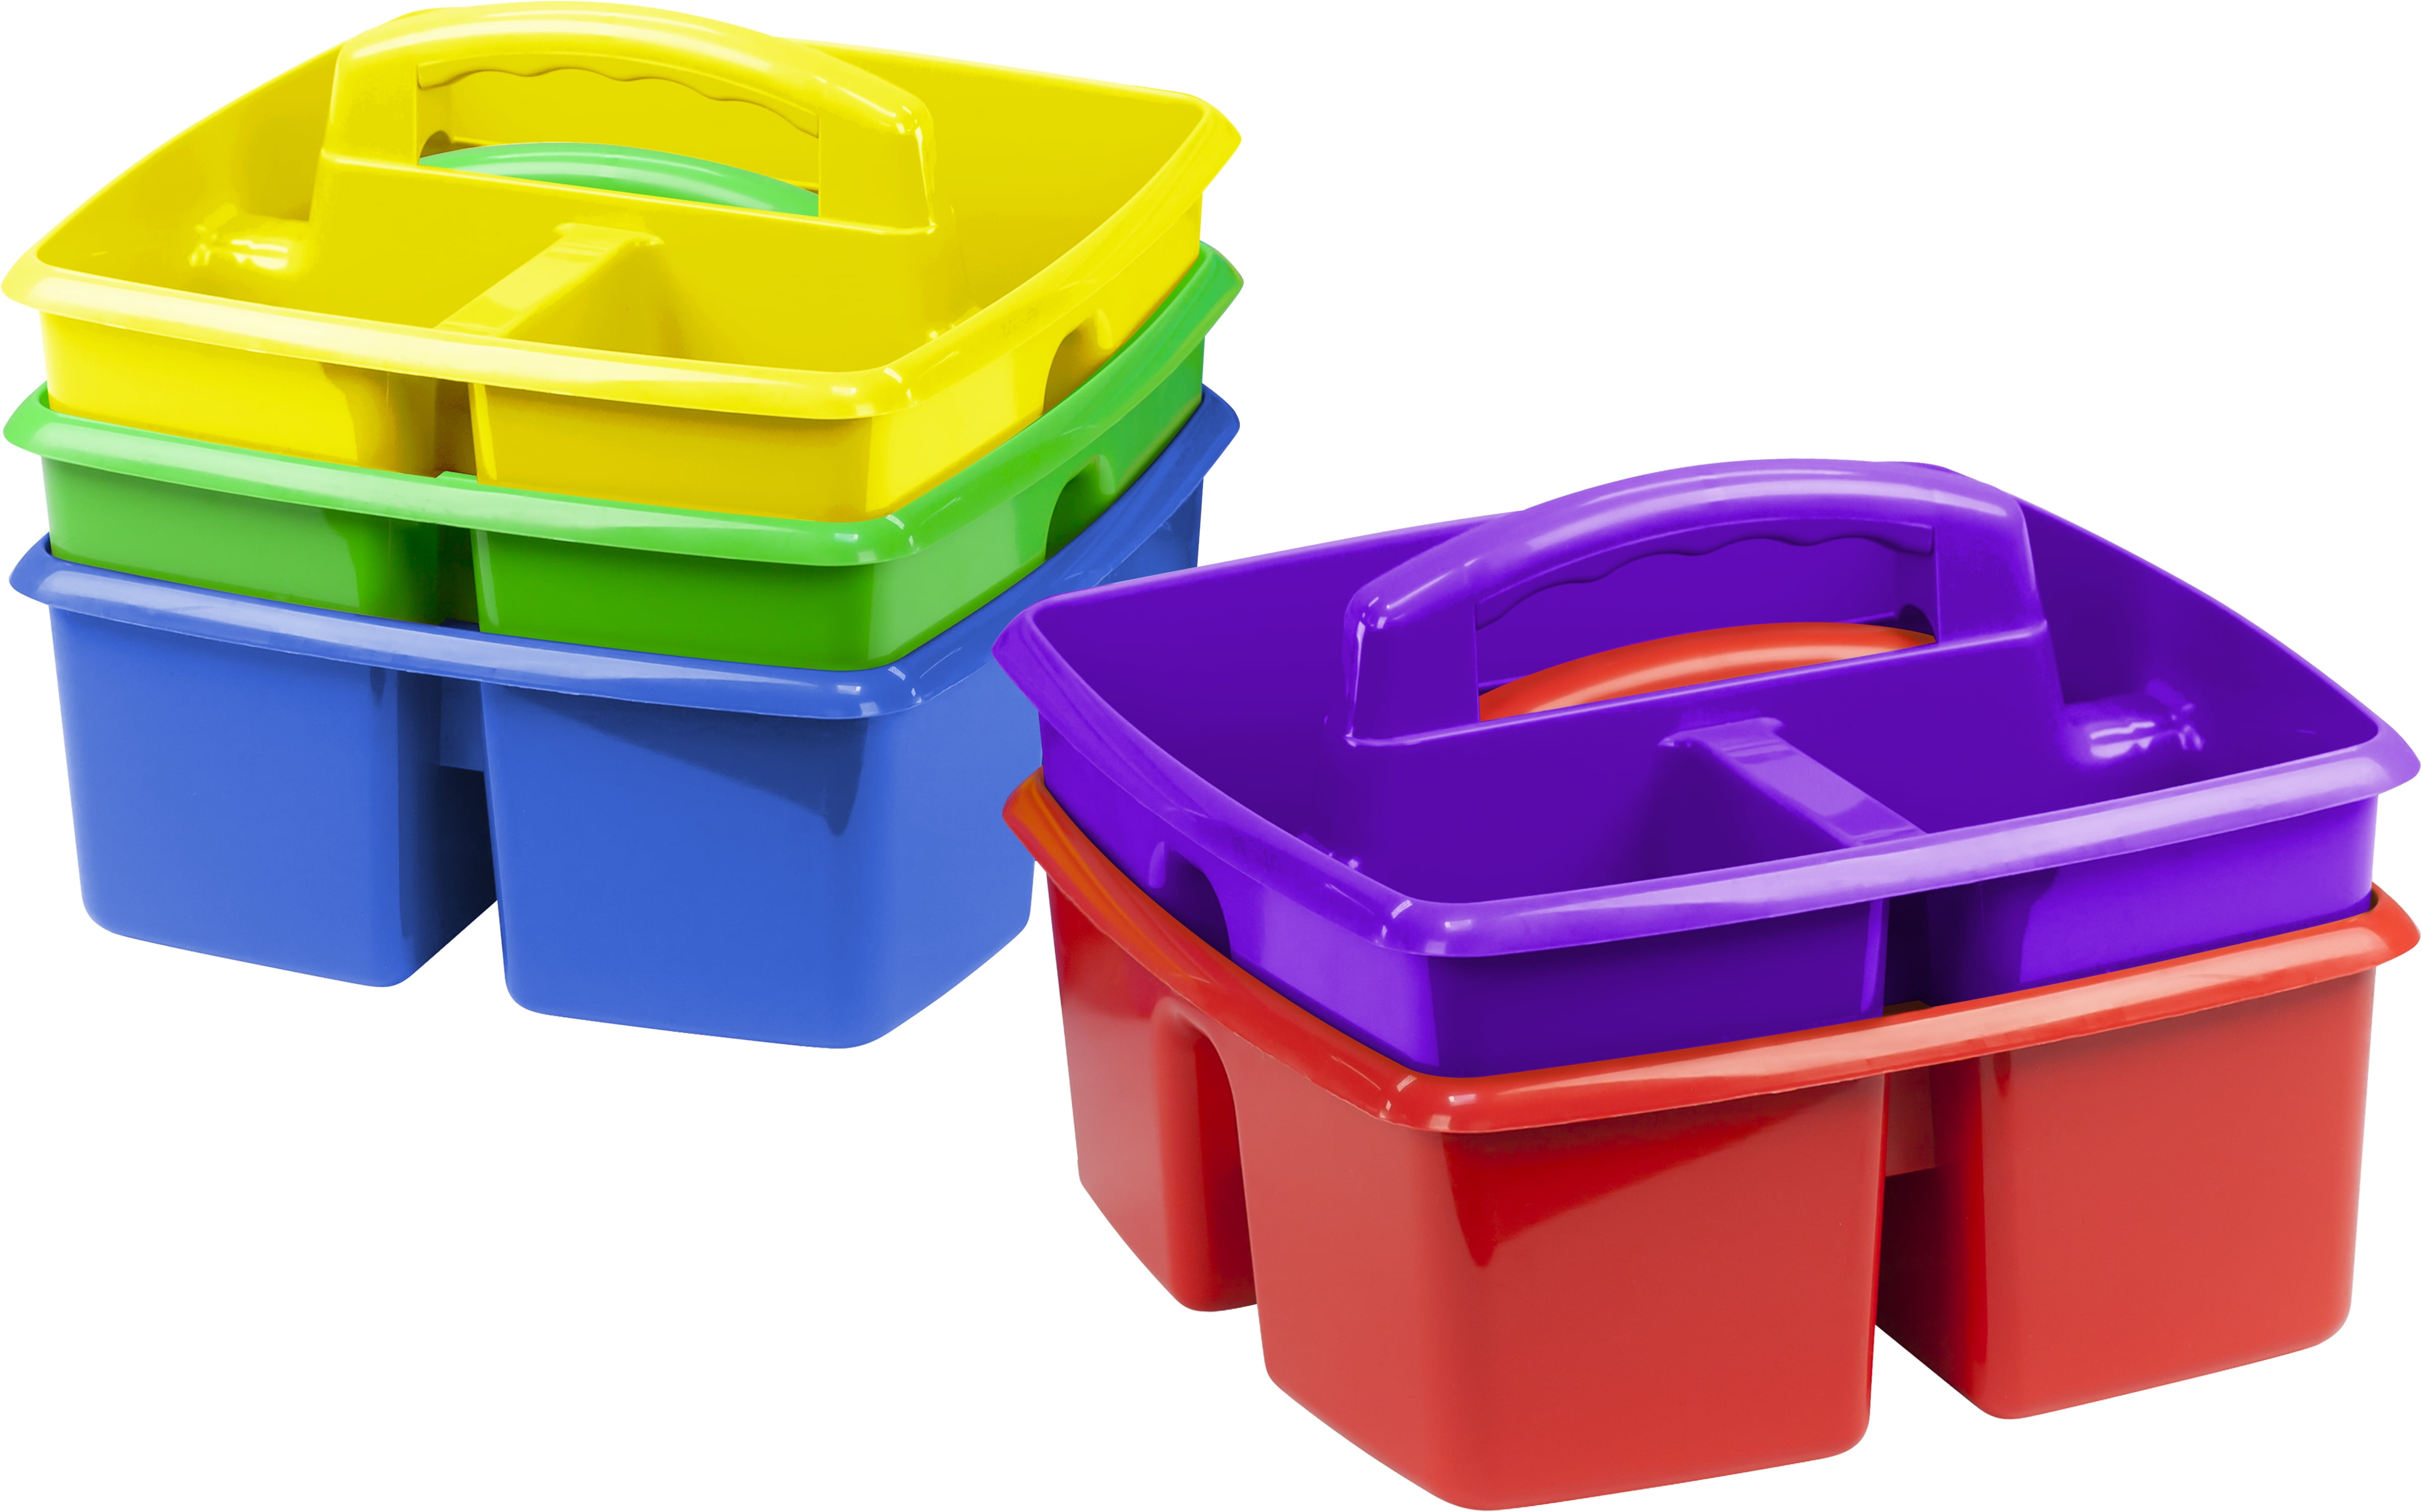 Storex Classroom Caddy, Set of 5, Assorted Colors